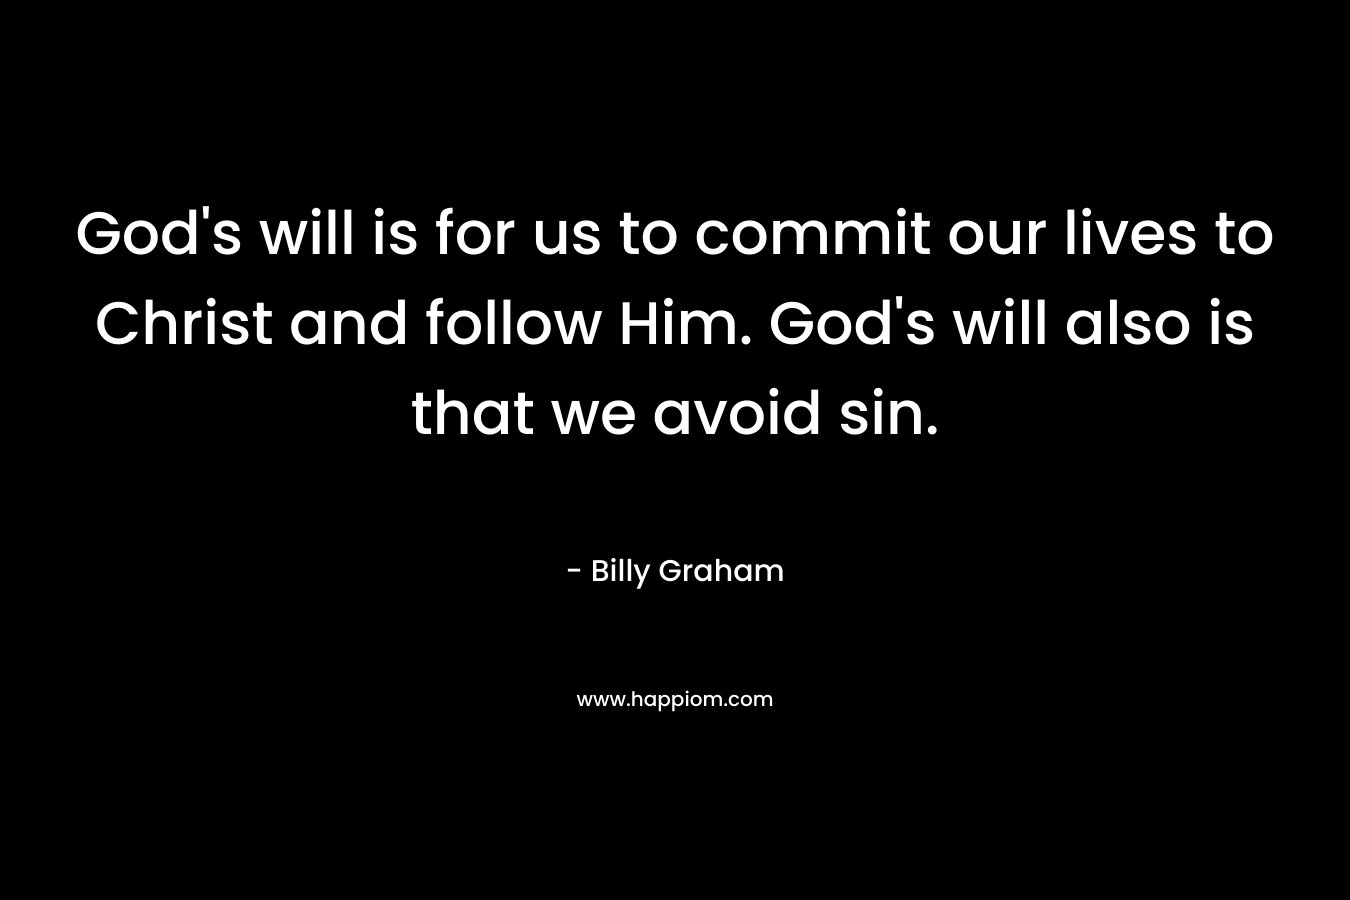 God's will is for us to commit our lives to Christ and follow Him. God's will also is that we avoid sin.